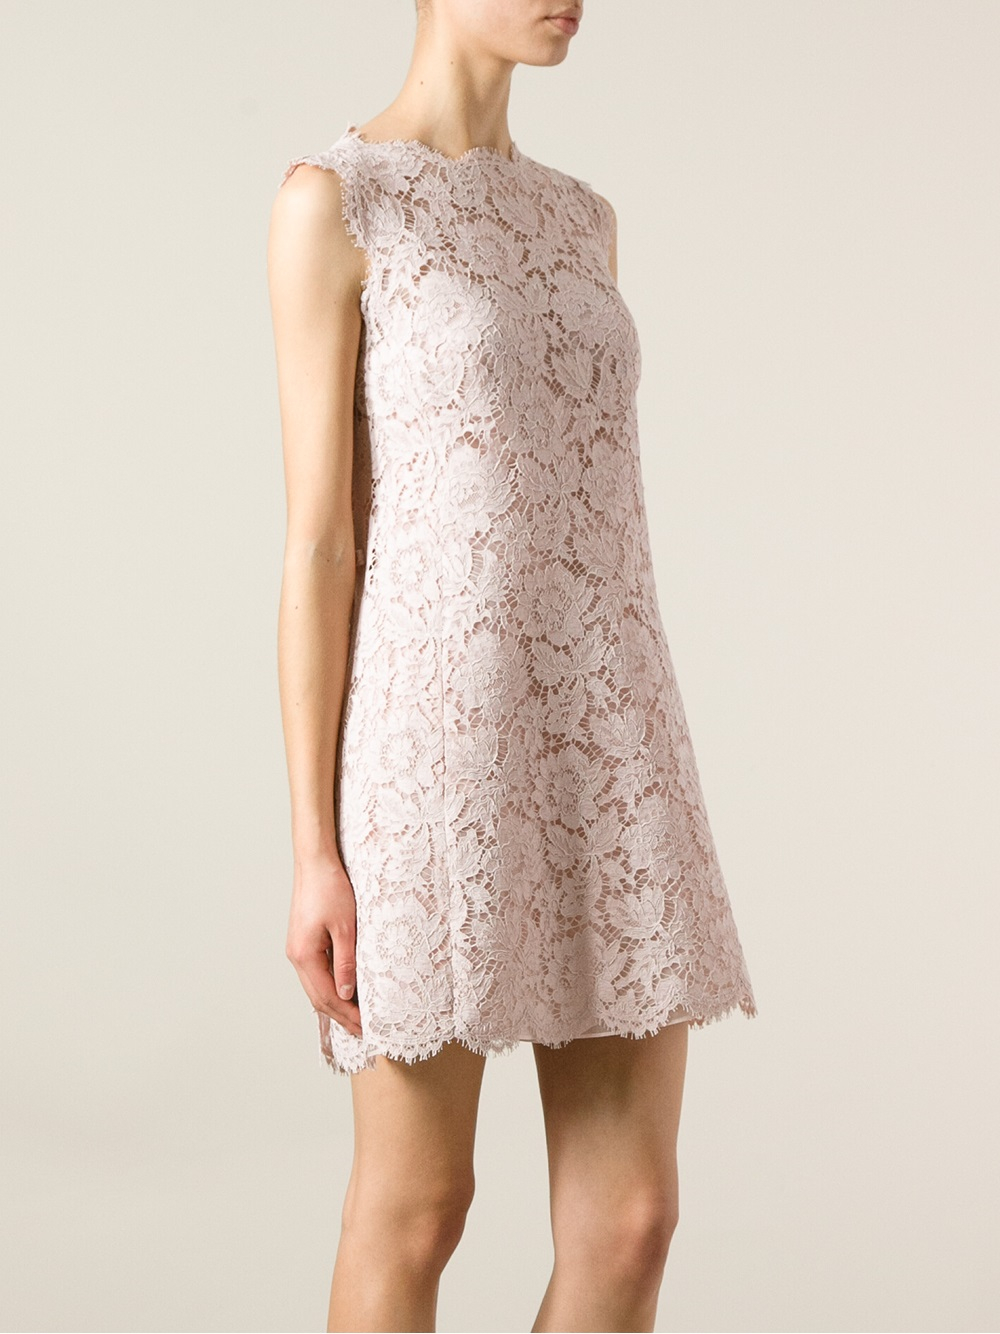 Valentino Lace Dress 2016 | The Art of Mike Mignola